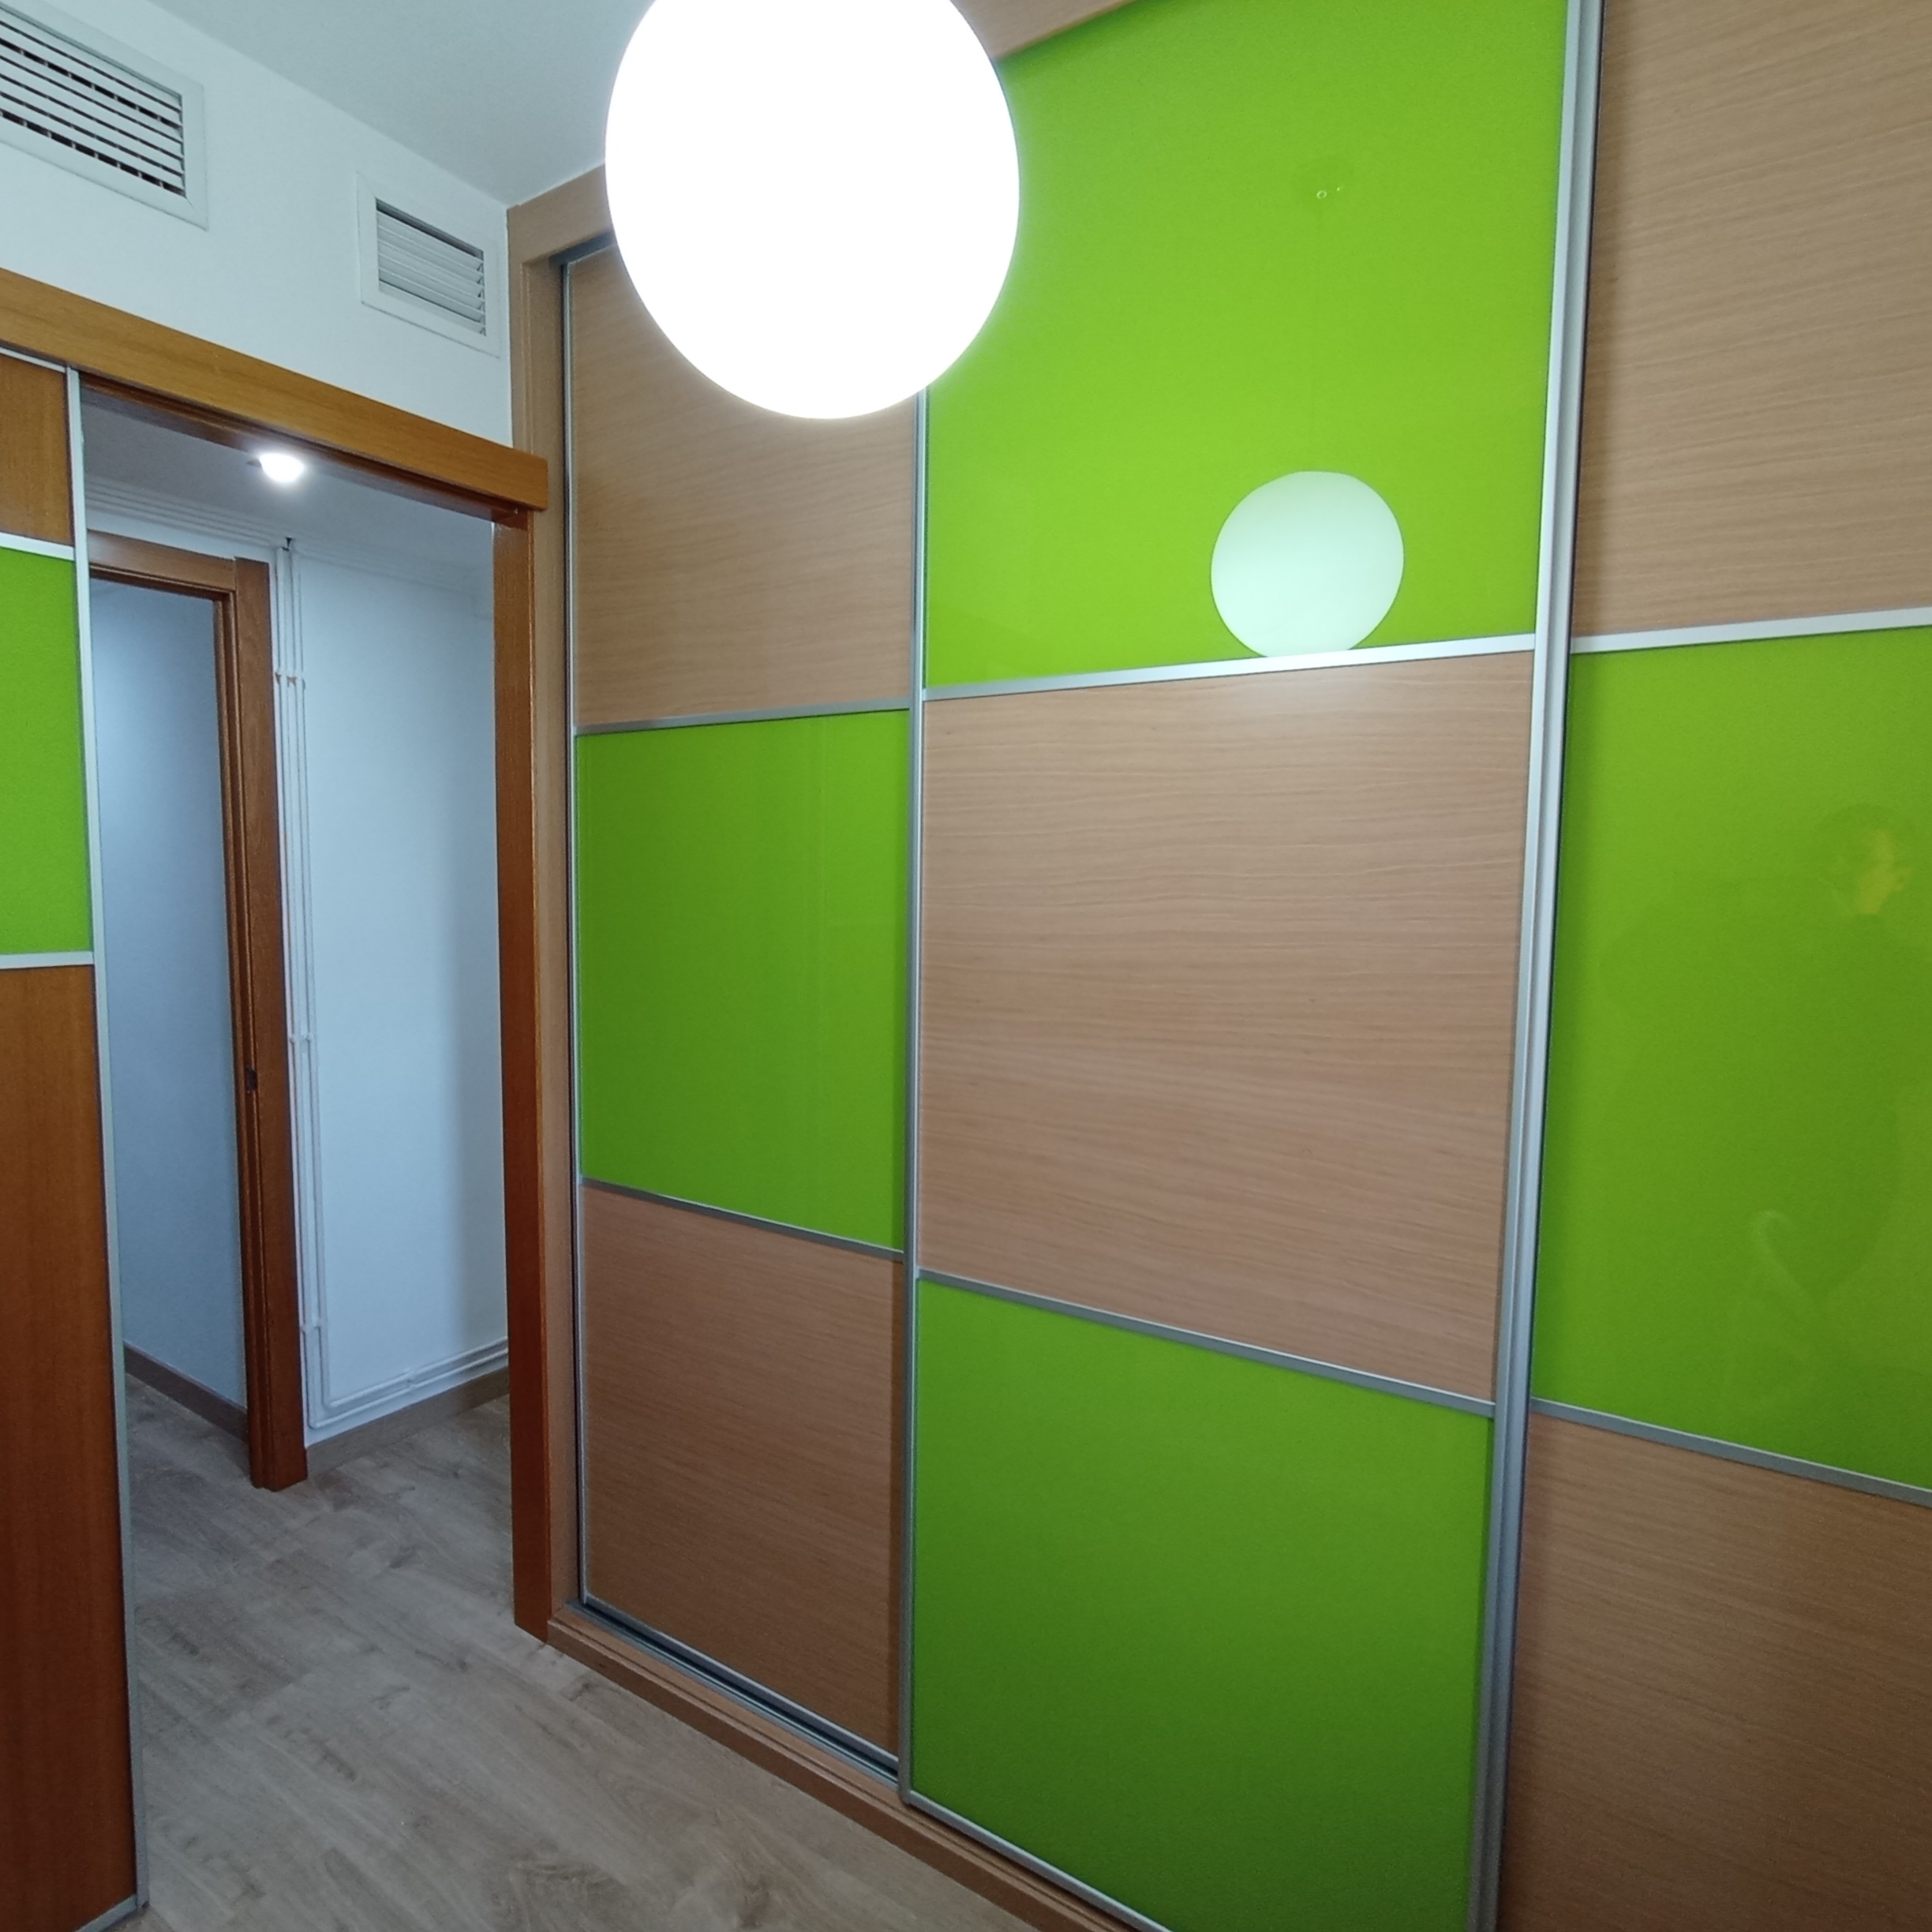 Escultor - 3 Bedroom apartment for rent in Valencia office 1